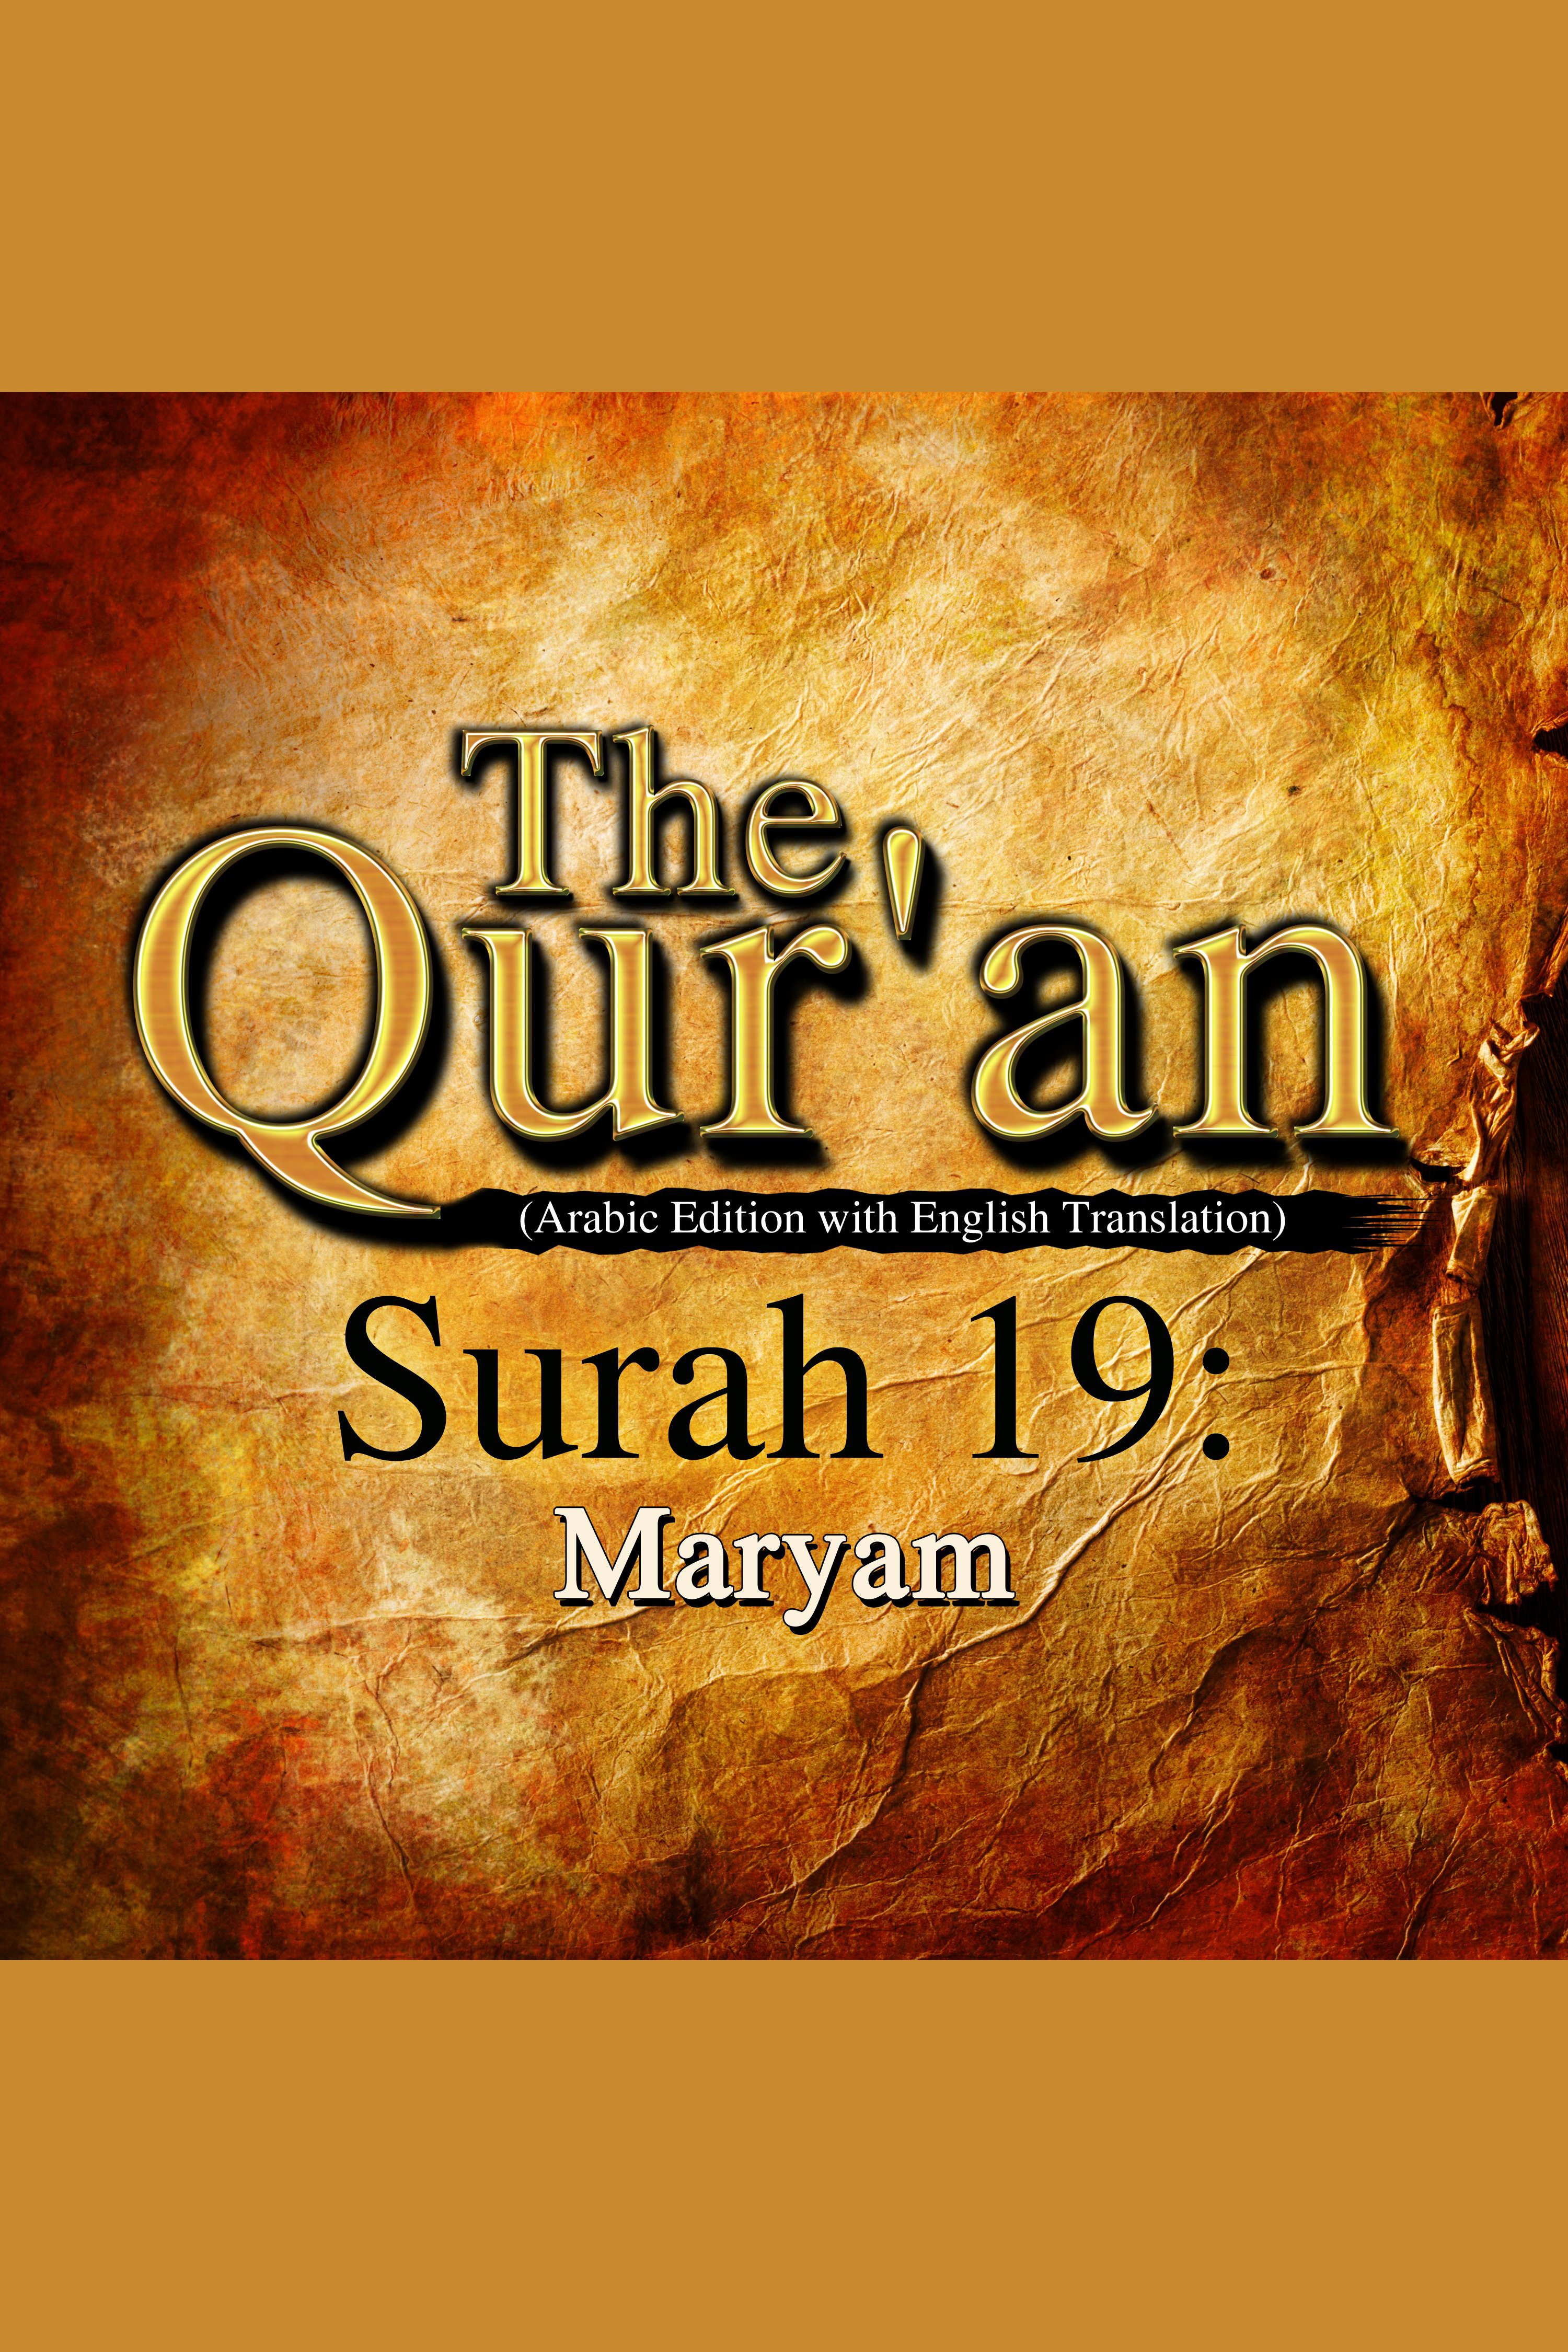 The Qur'an - Surah 19 - Maryam cover image